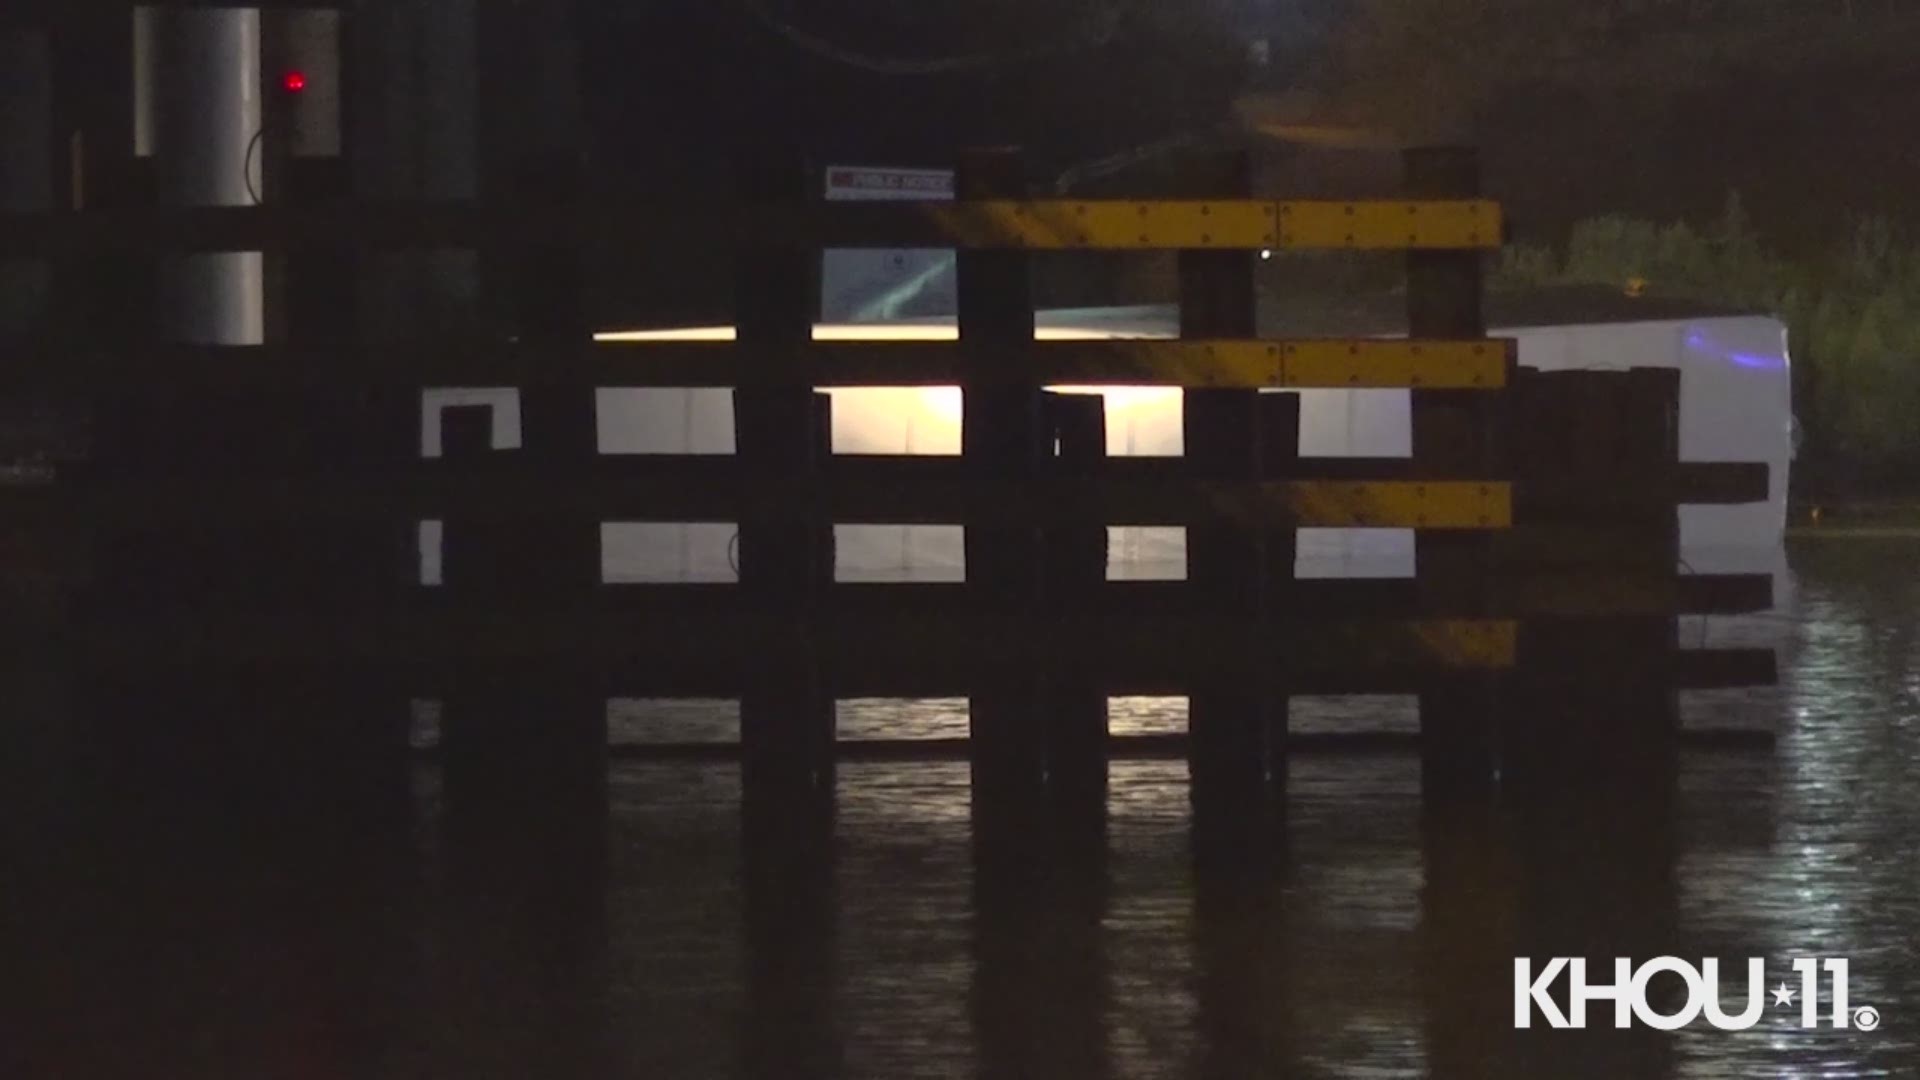 The I-10 East Freeway is closed heading west/inbound due after an 18-wheeler box truck went off the bridge into the San Jacinto River early Thursday, according to Harris County Sheriff Ed Gonzalez.